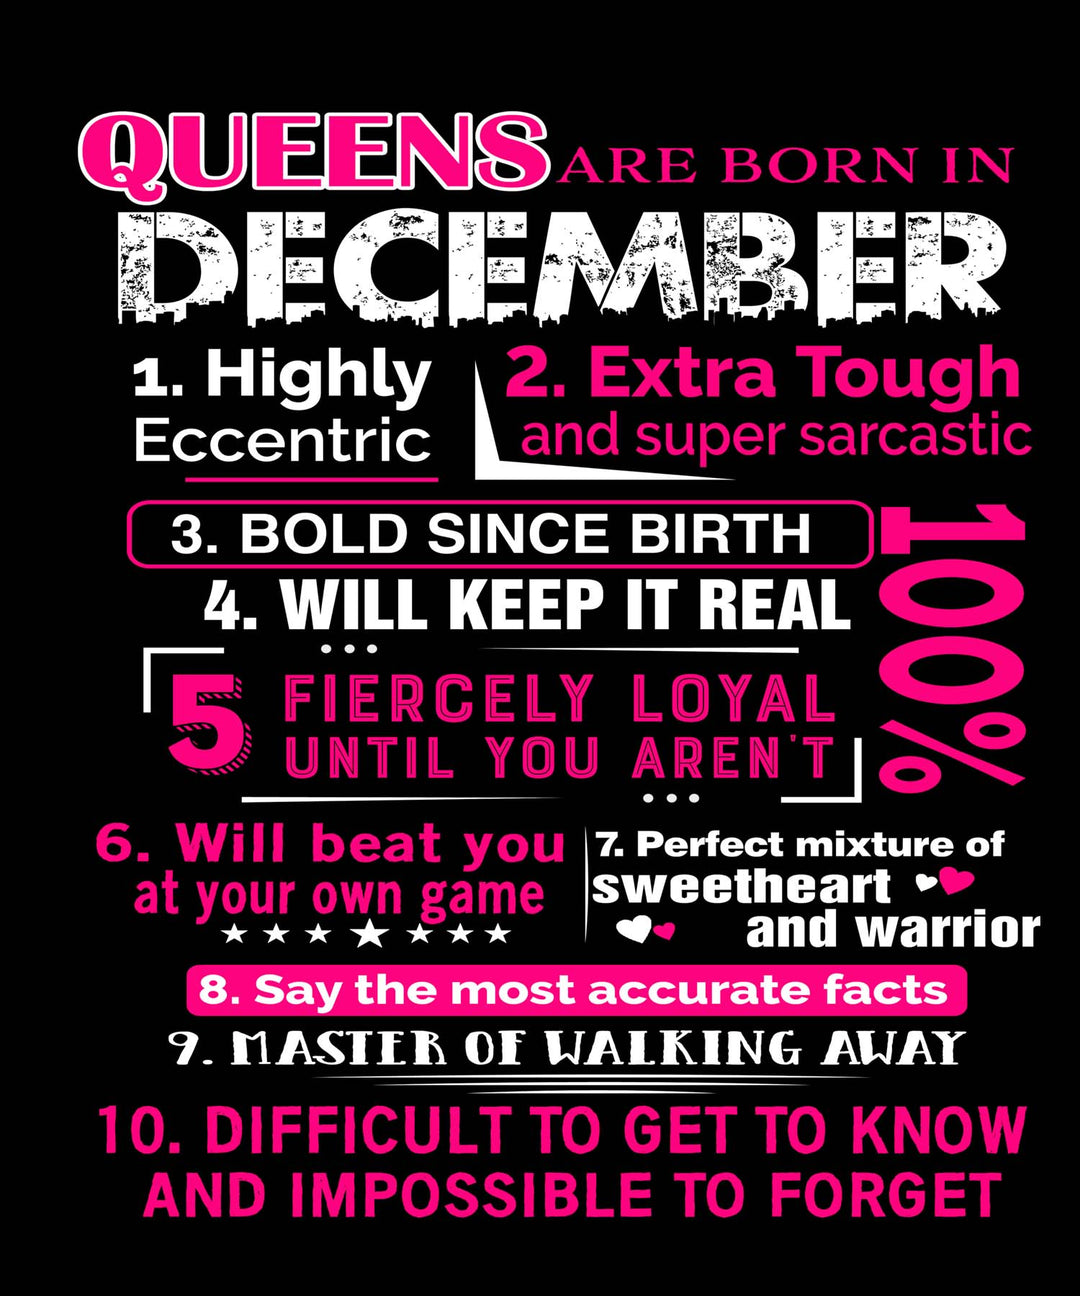 10 REASONS QUEENS ARE BORN IN DECEMBER